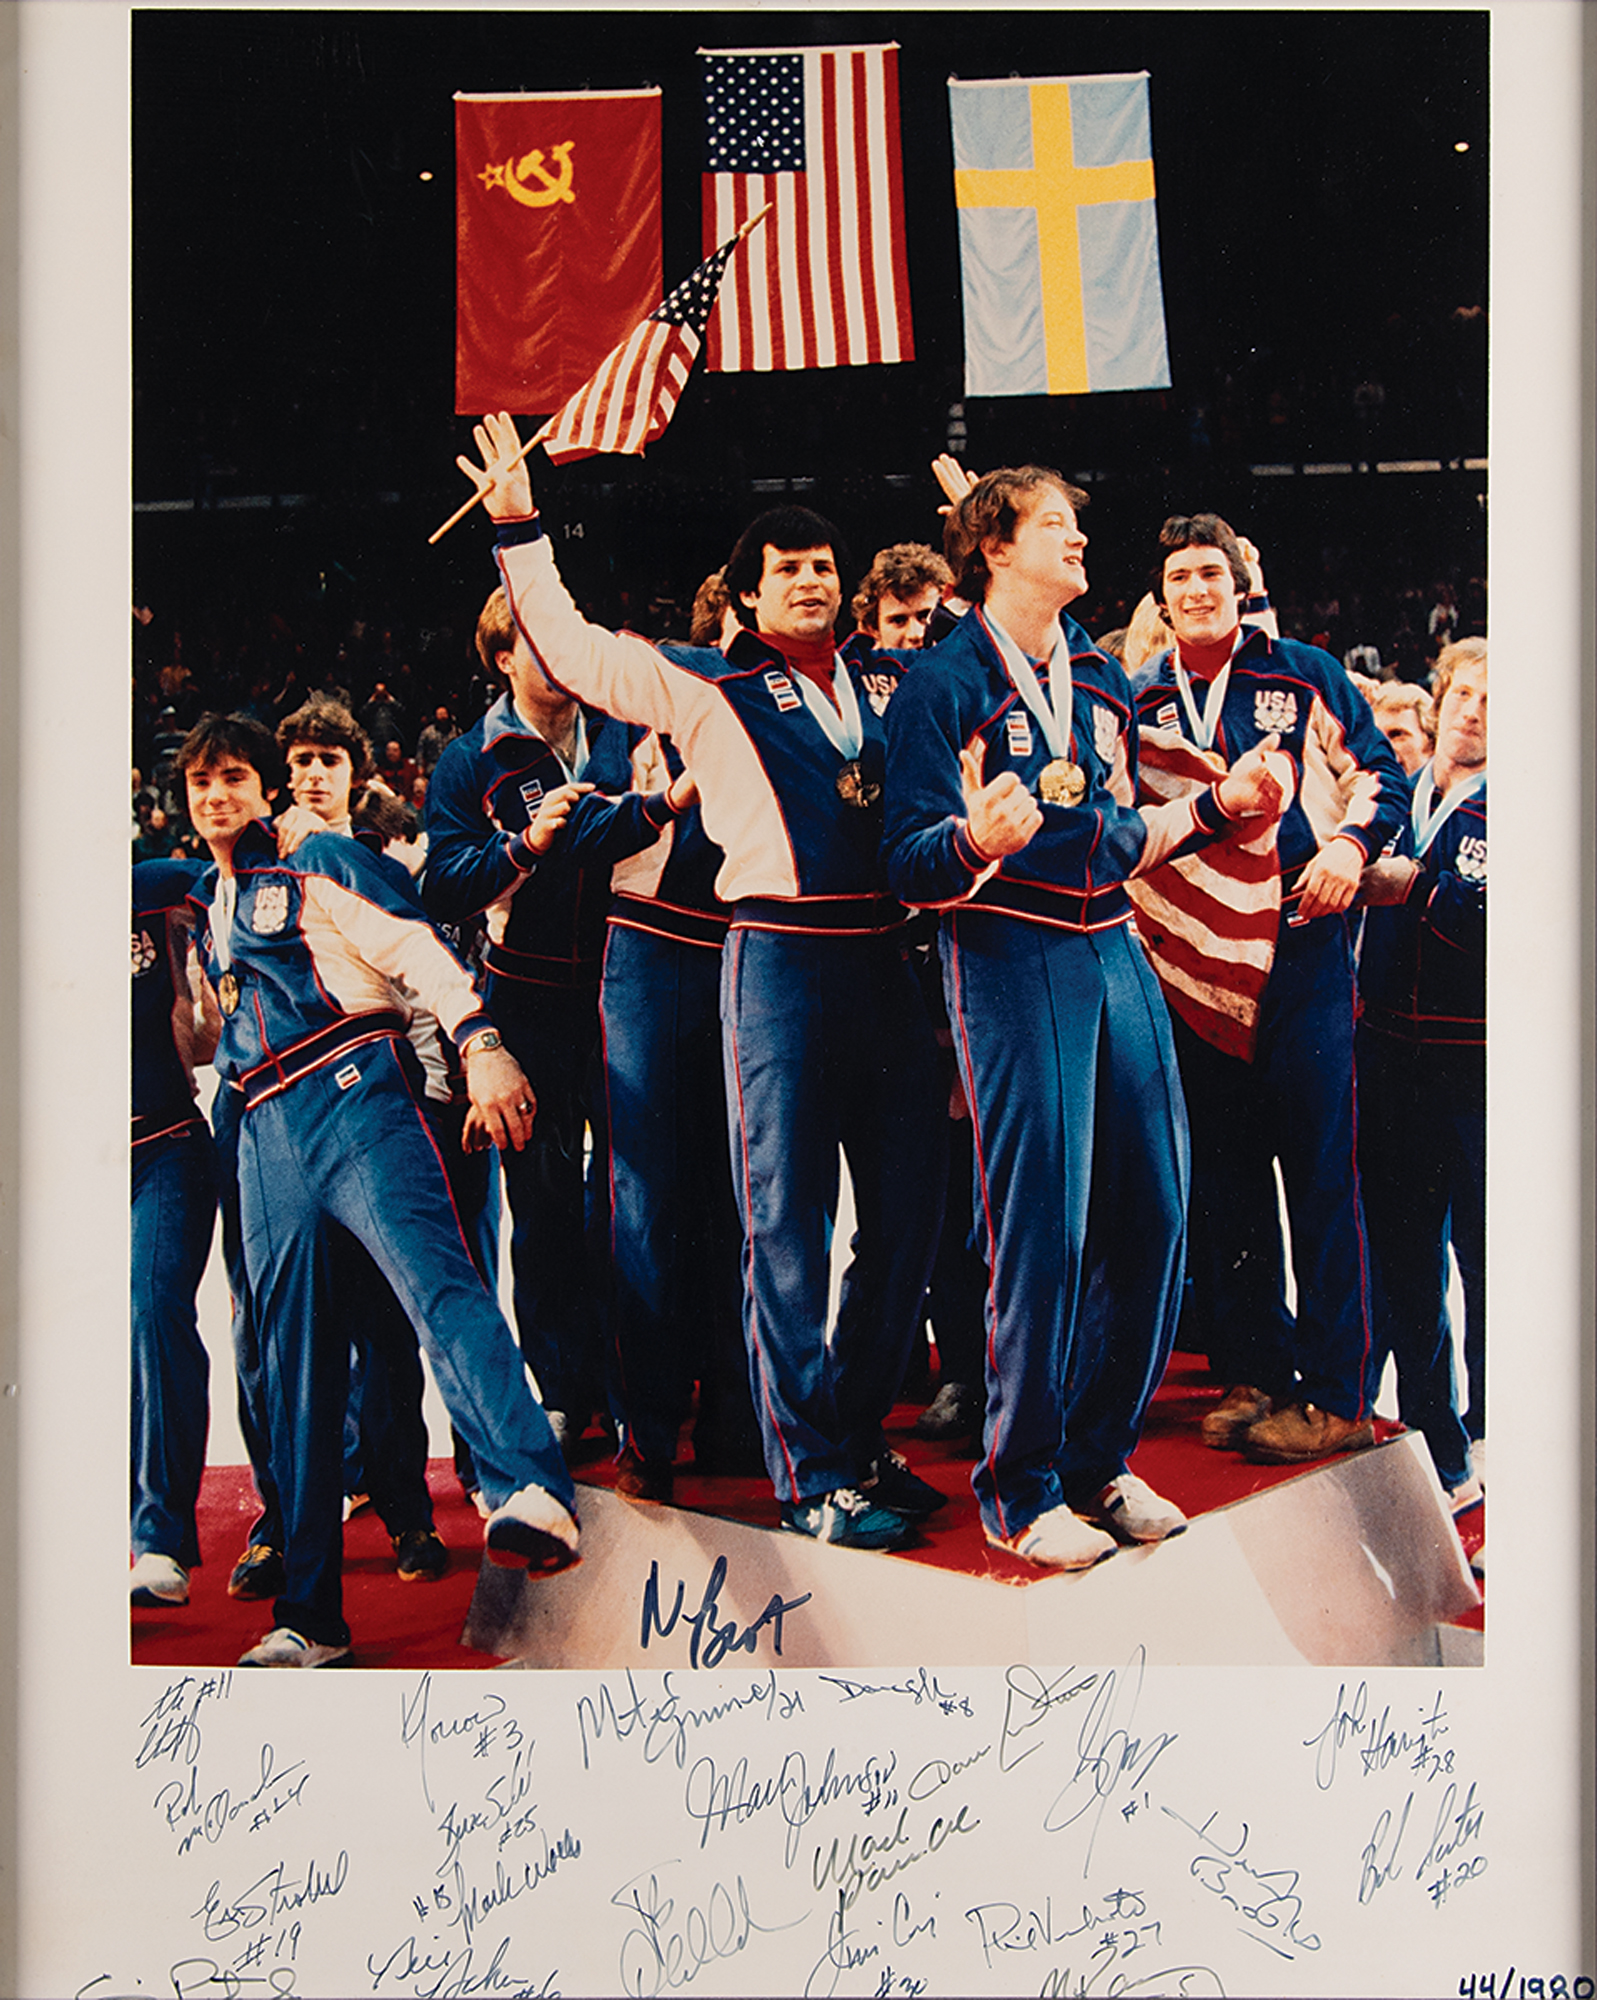 Photos, opening bids for Jim Craig auction of Miracle on Ice flag